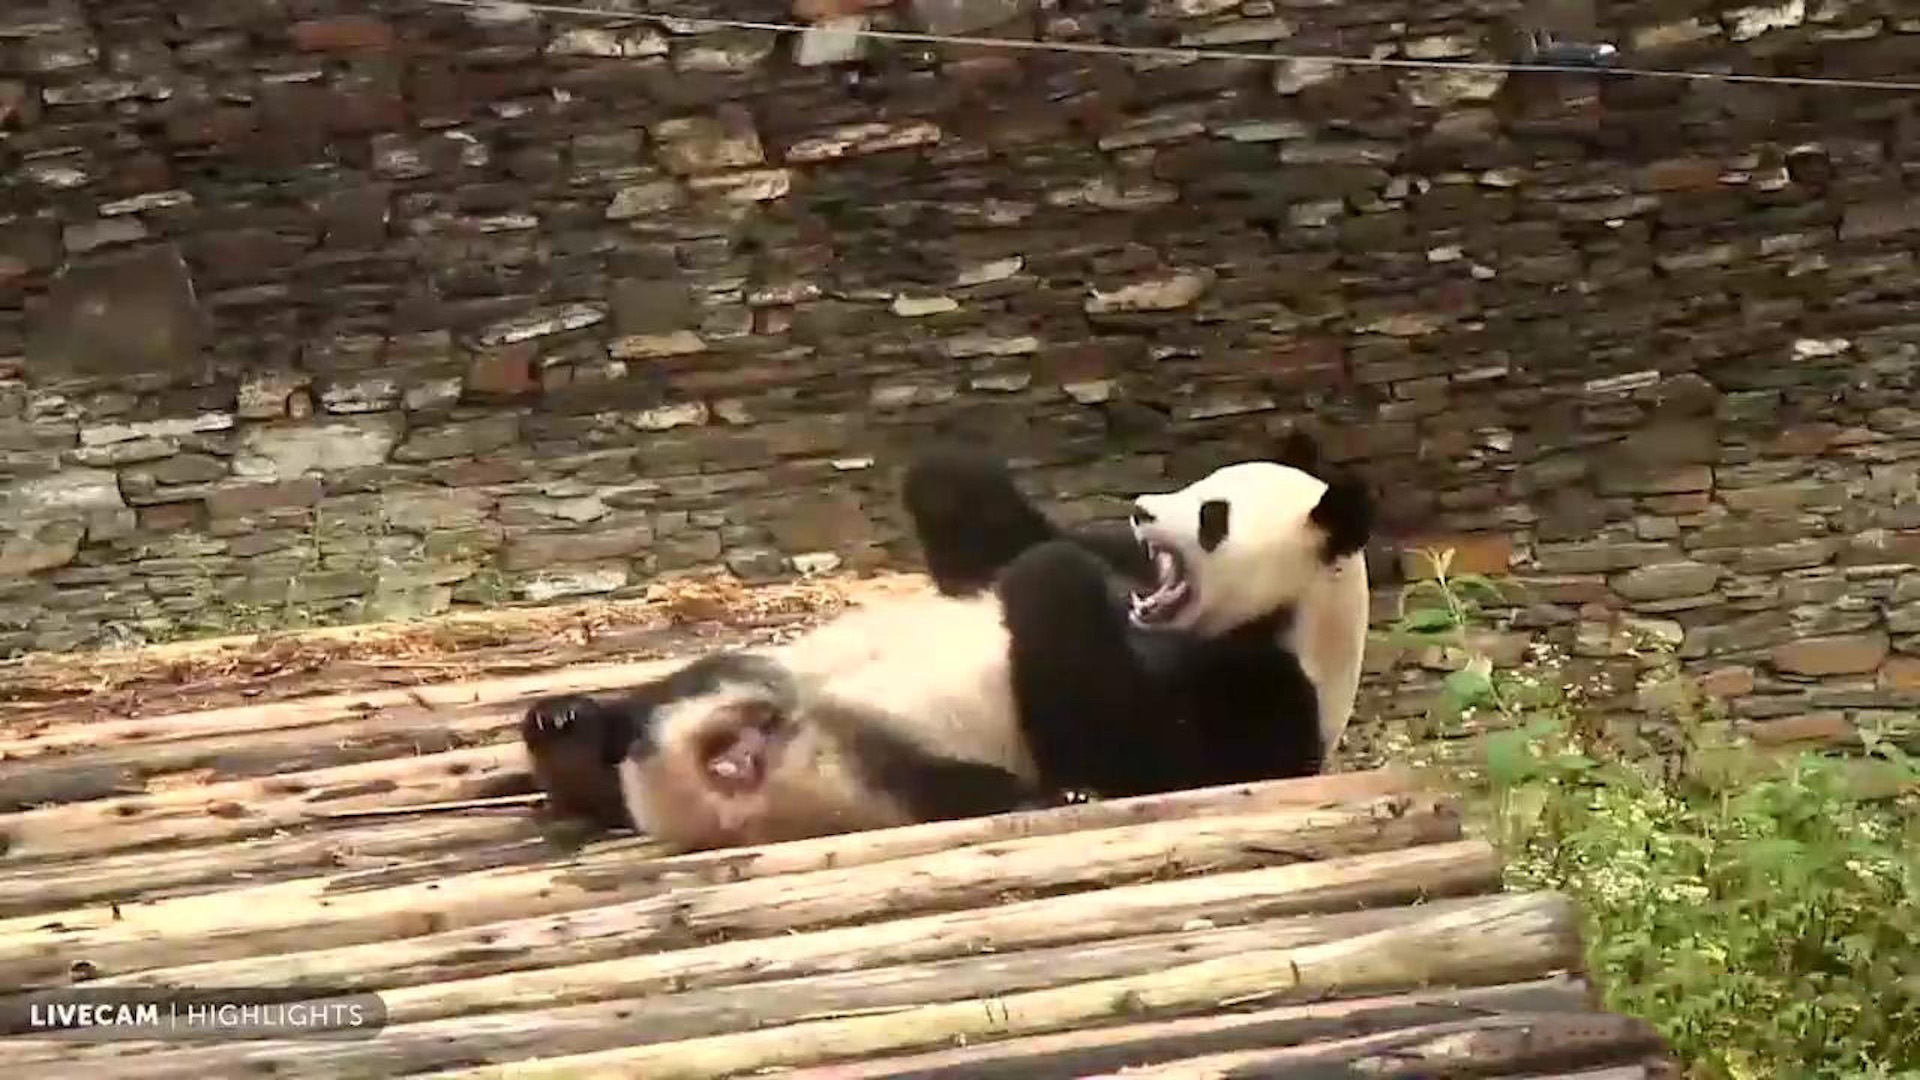 Giant Panda Cam - live stream from China 